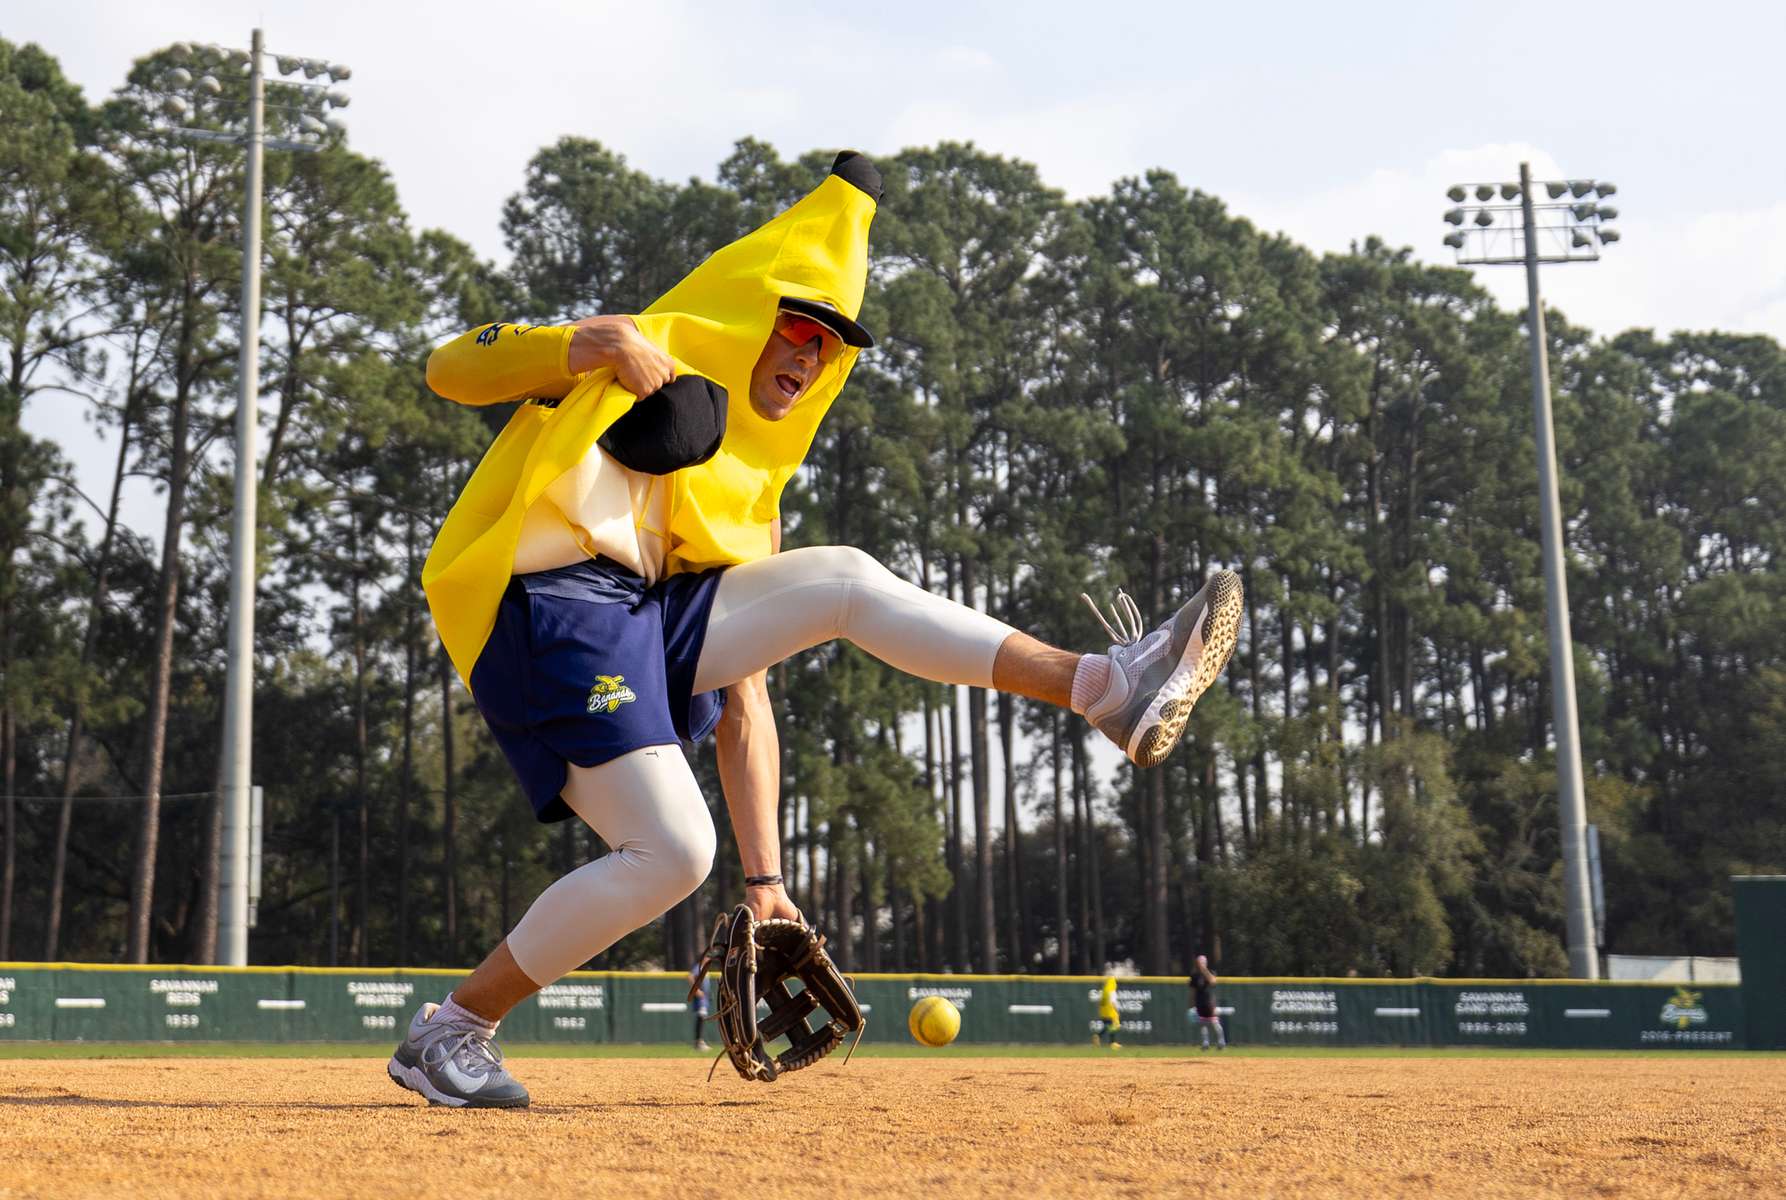 Jackson Olson #8 of the Savannah Bananas fields ground balls in a Banana Skin suit prior to their home opener against the Party Animals at Grayson Stadium on February 25, 2023 in Savannah, Georgia.   